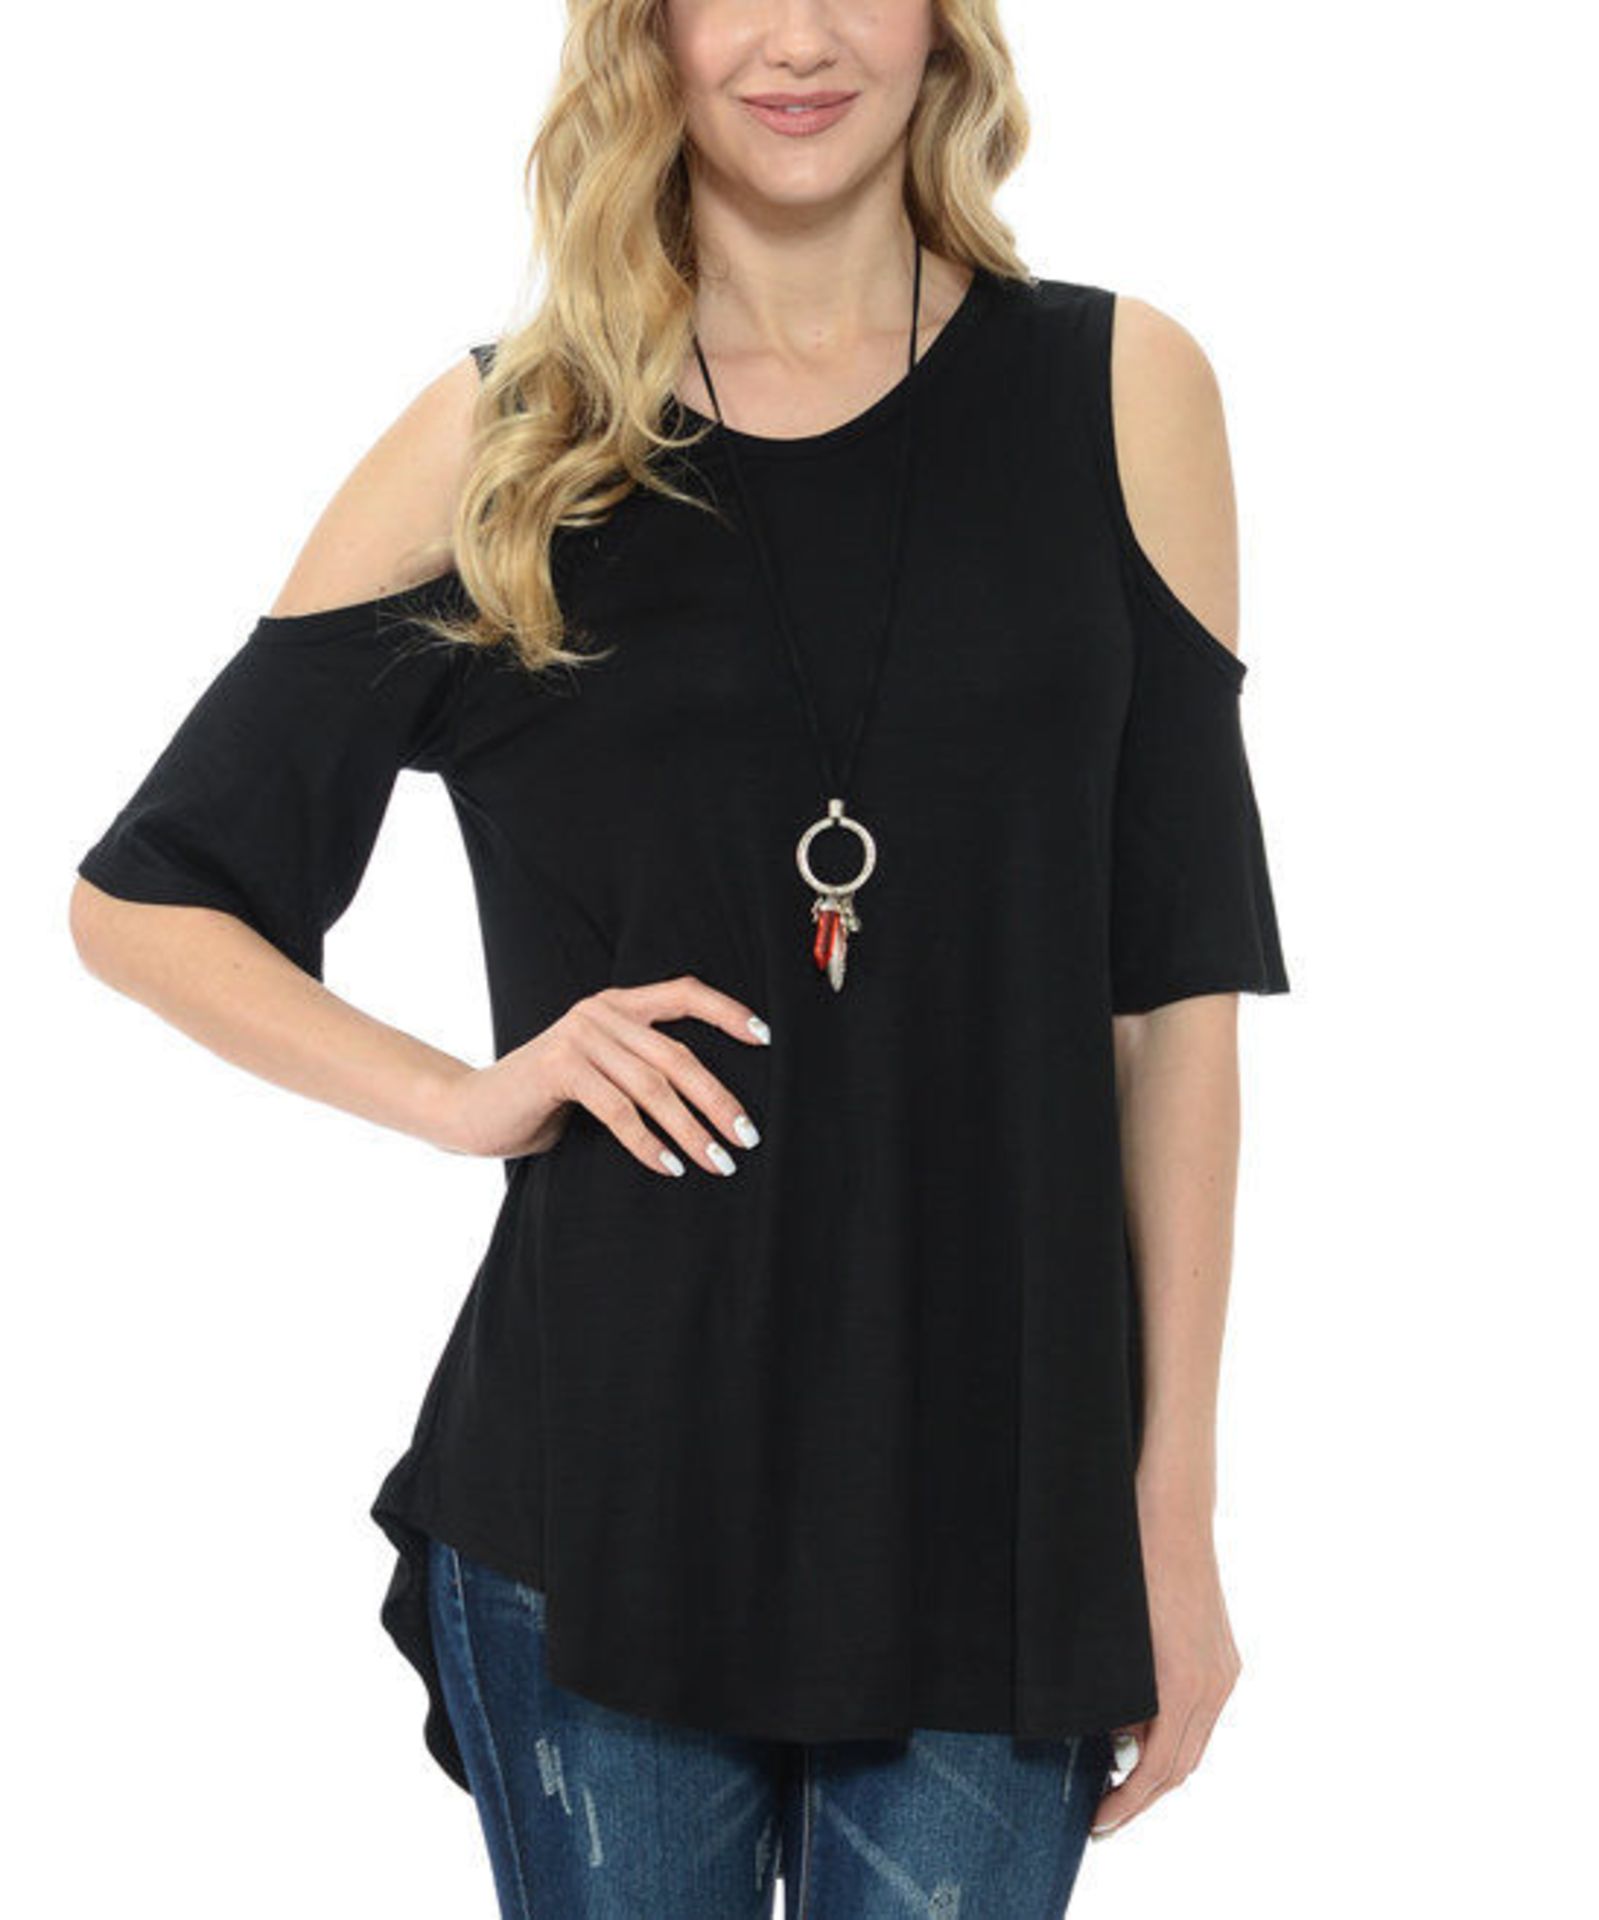 Cool Melon Black Cold-Shoulder Top (Us 18/Uk 22/Eu 50) (New With Tags) [Ref: 46366634-T-54] - Image 3 of 3